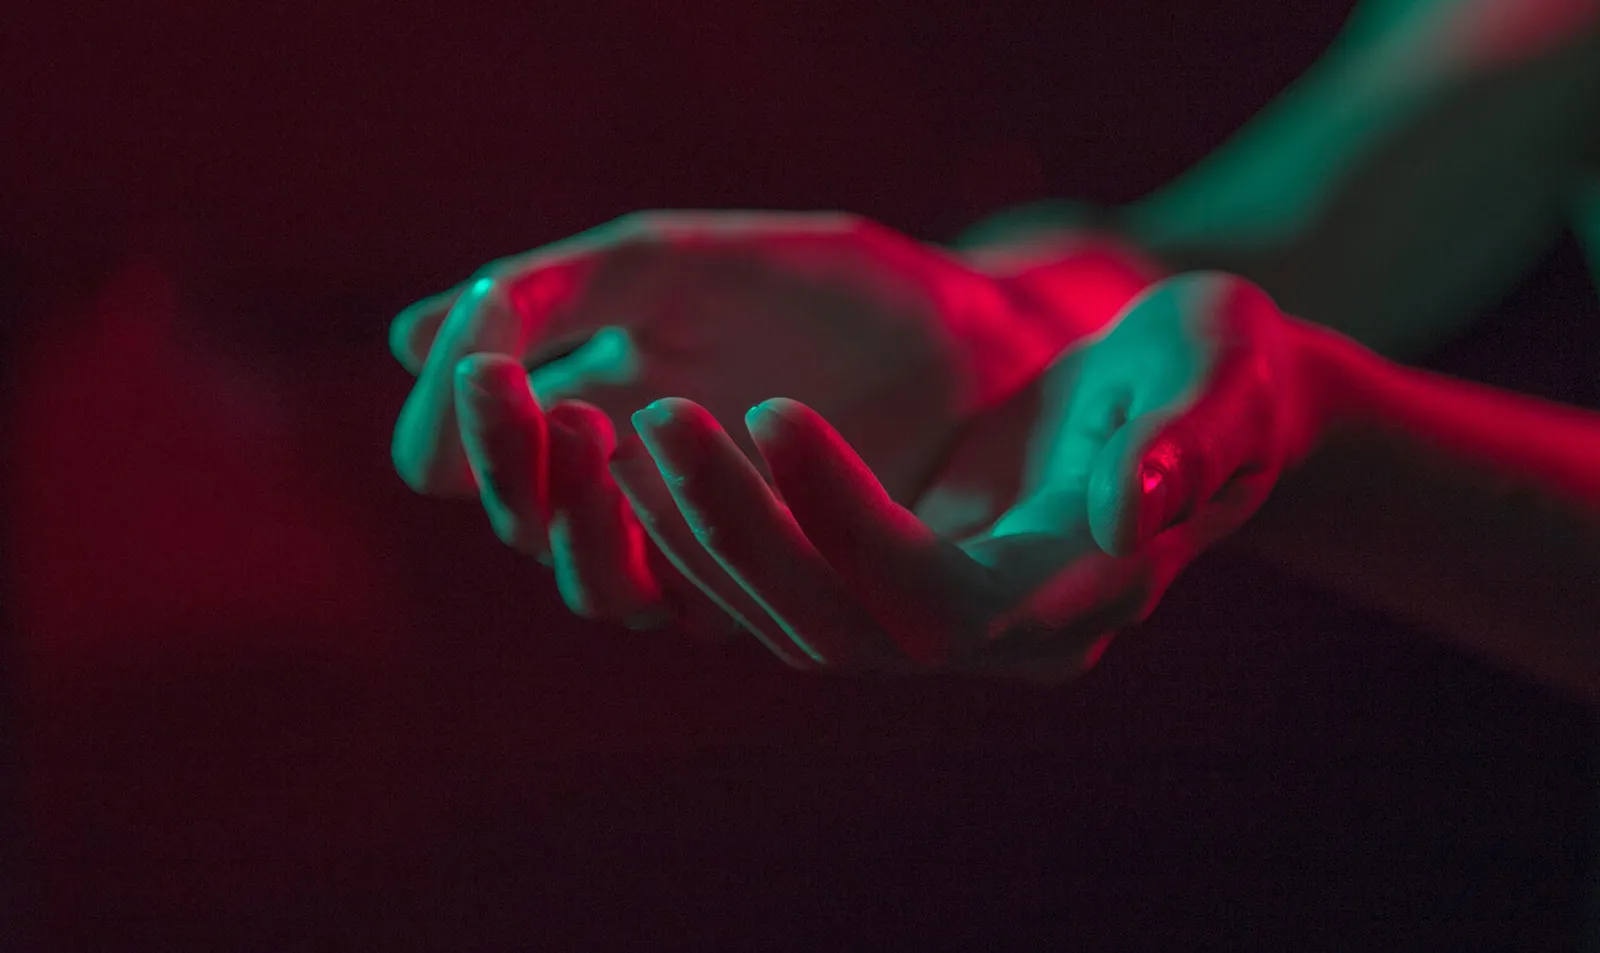 red and green lights with hands heldtogether